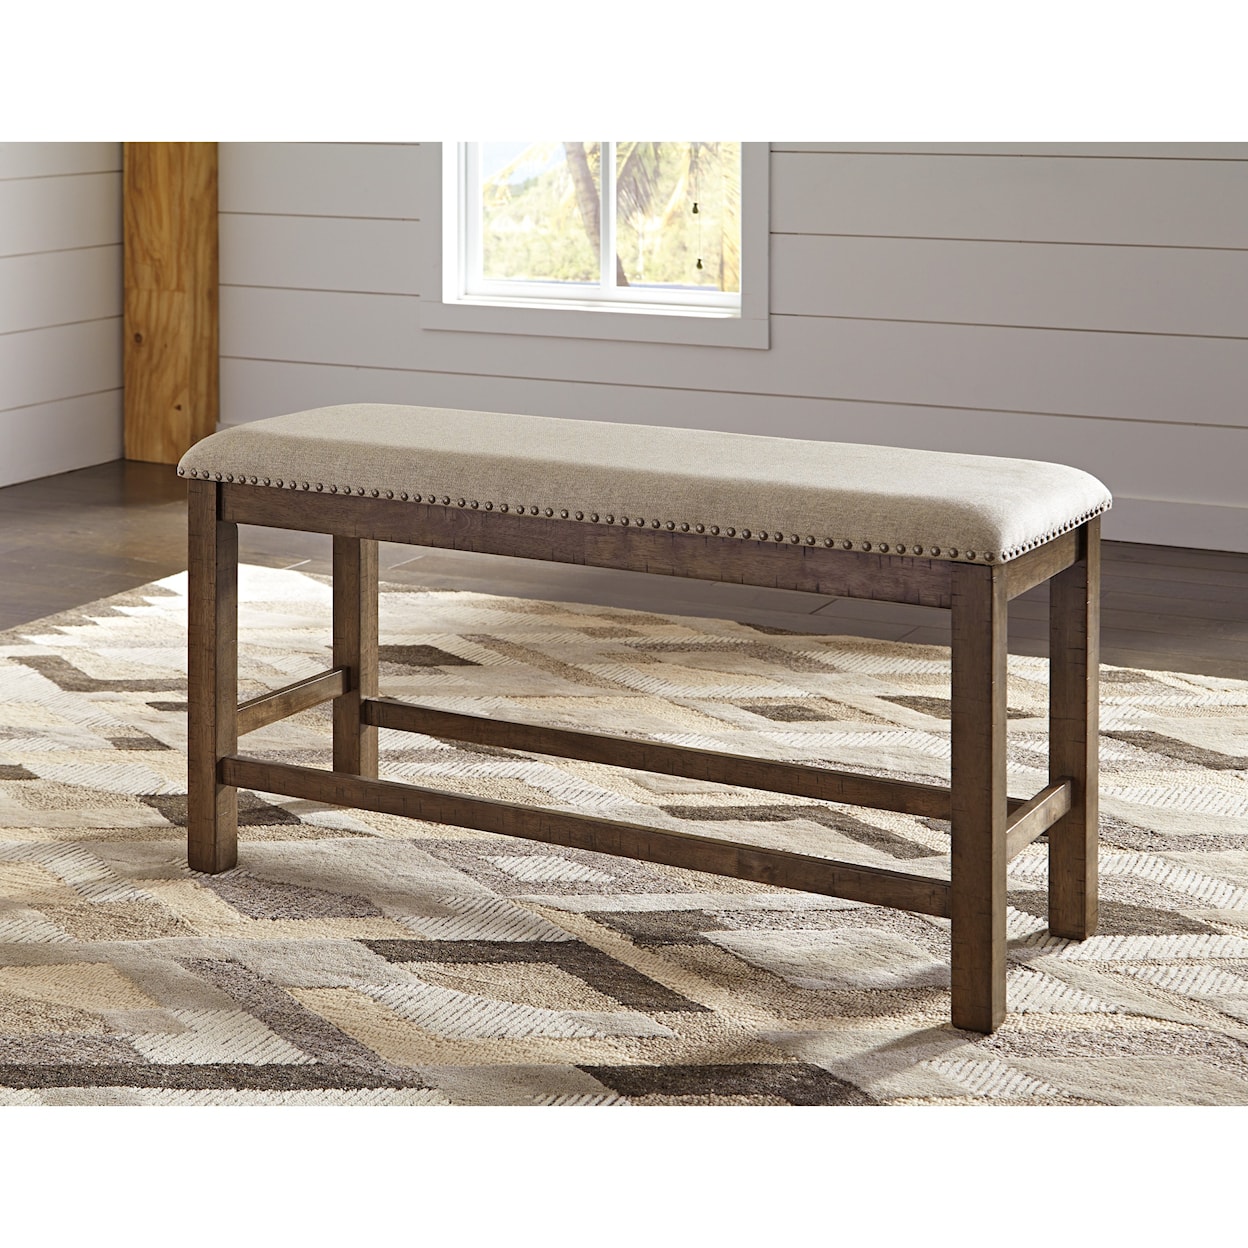 Signature Design by Ashley Moriville Double Upholstered Bench